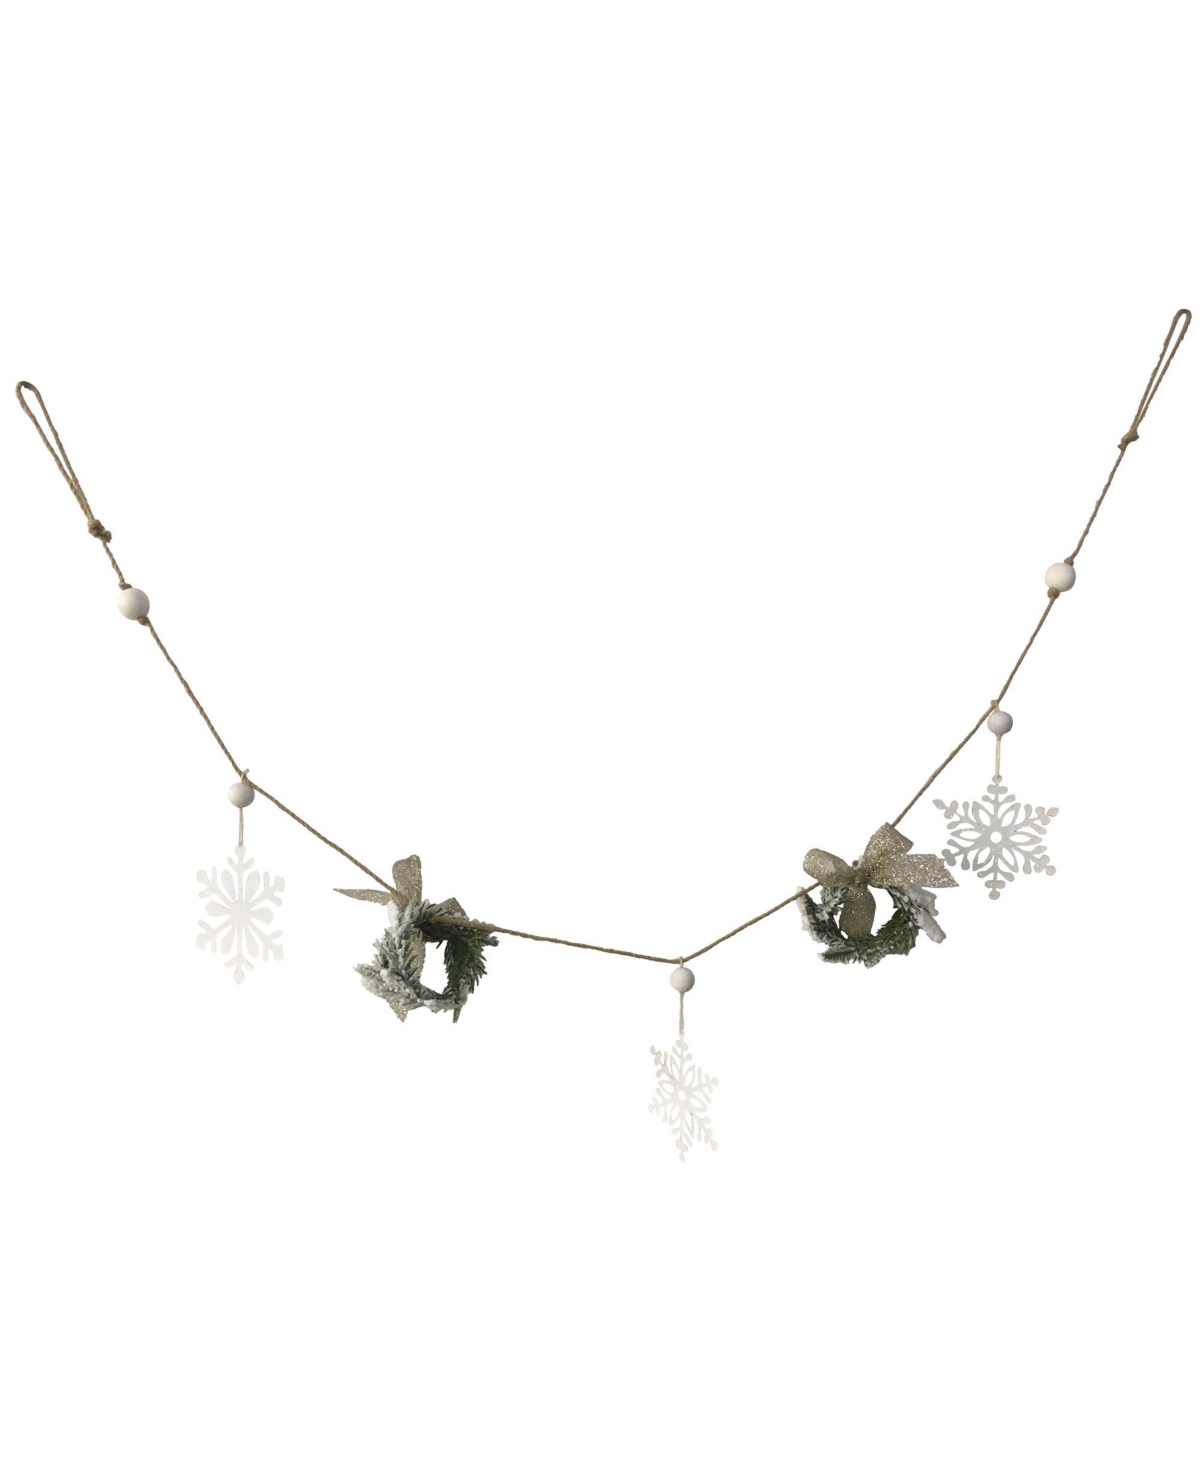 Northlight Unlit Snowflake And Frosted Pine Christmas Garland With Wooden Beads, 4.75" In White